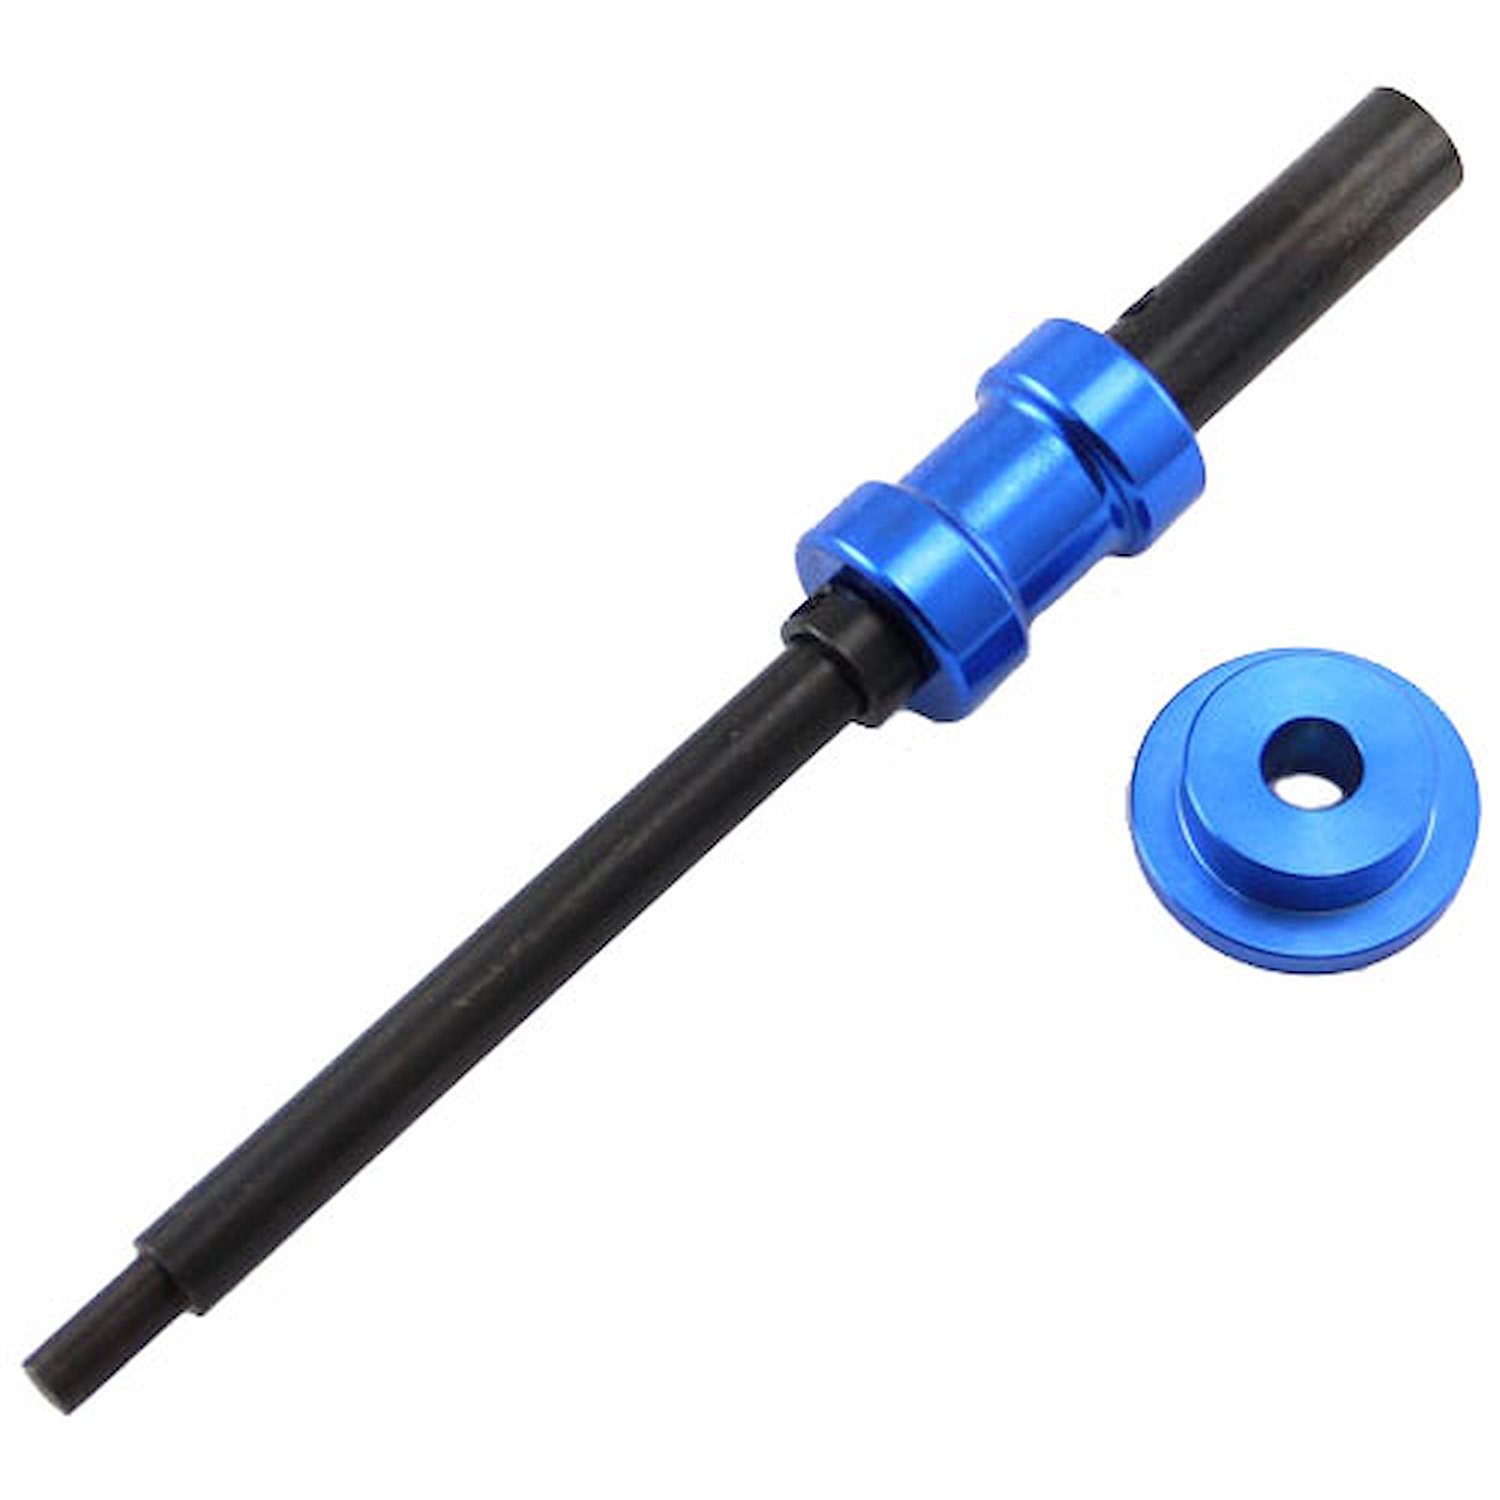 Engine Oil Pump Primer Tool for Small & Big Block Chevy V8